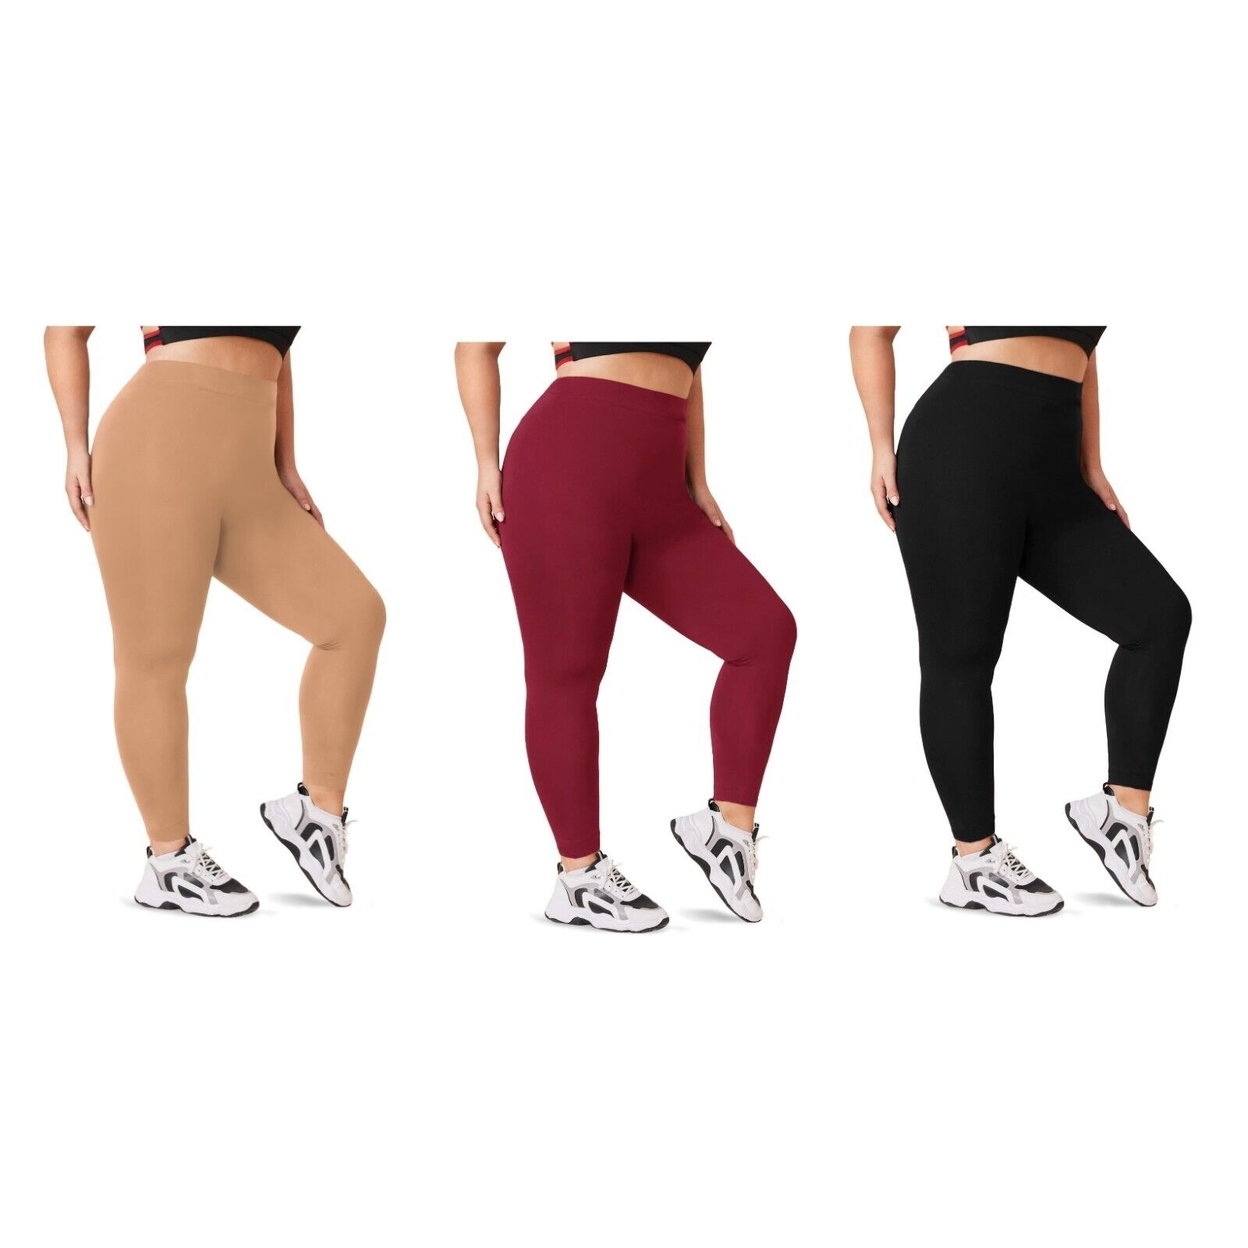 2-Pack: Women's Casual Ultra-Soft Smooth High Waisted Athletic Active Yoga Leggings Plus Size Available - Red & Red, 3x